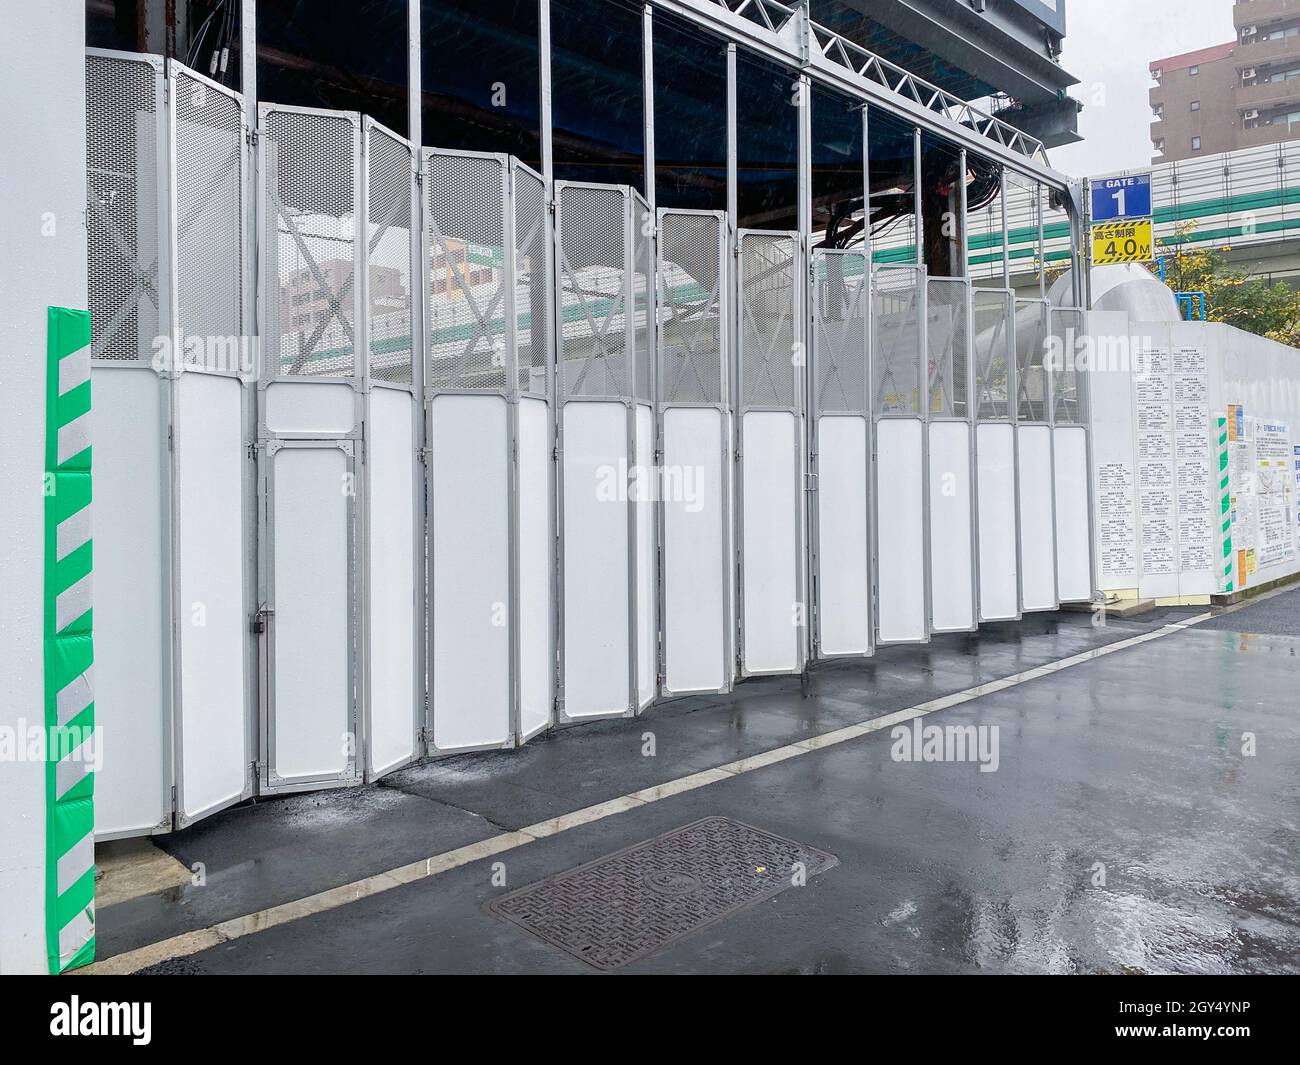 Tokyo, Japan - 23 November 2019: Clean and shine entrance to construction zone in Tokyo Stock Photo